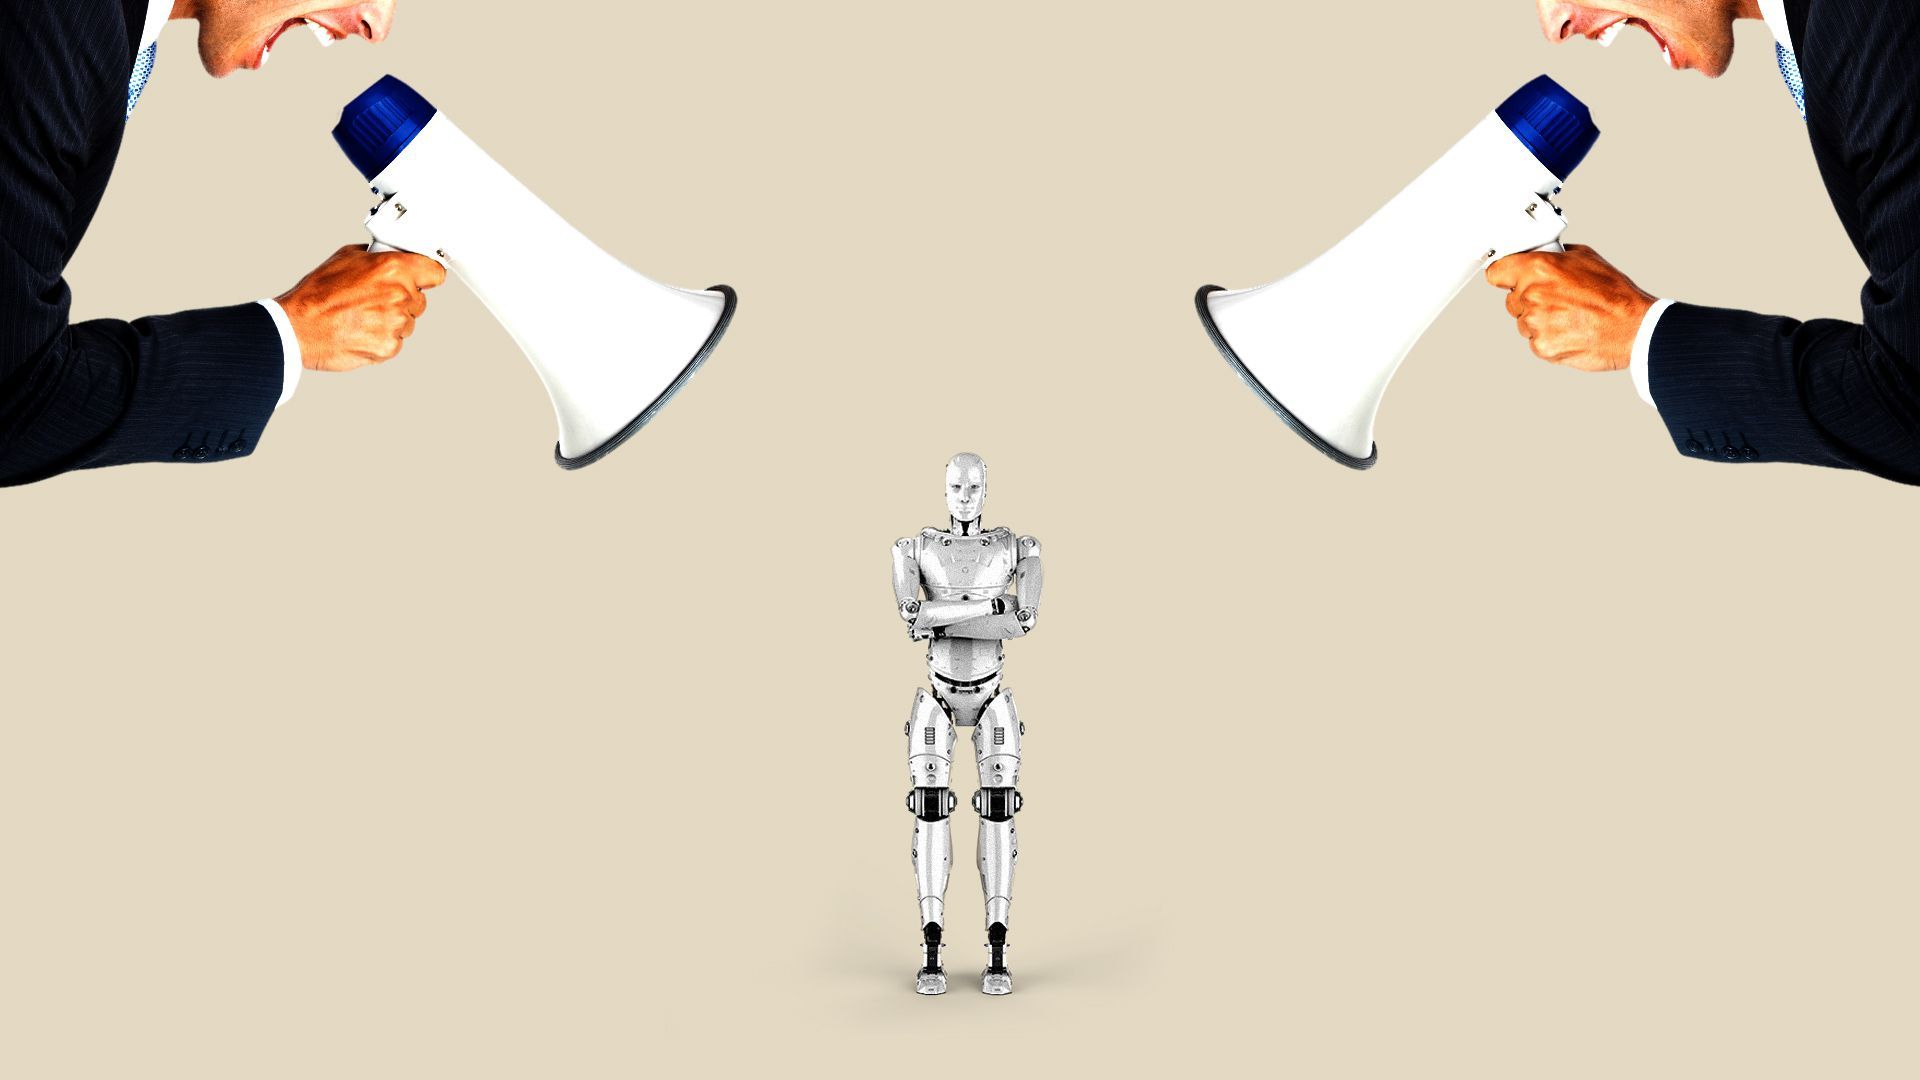 In this illustration, two businessmen with megaphones scream on either side of a miniature robot.